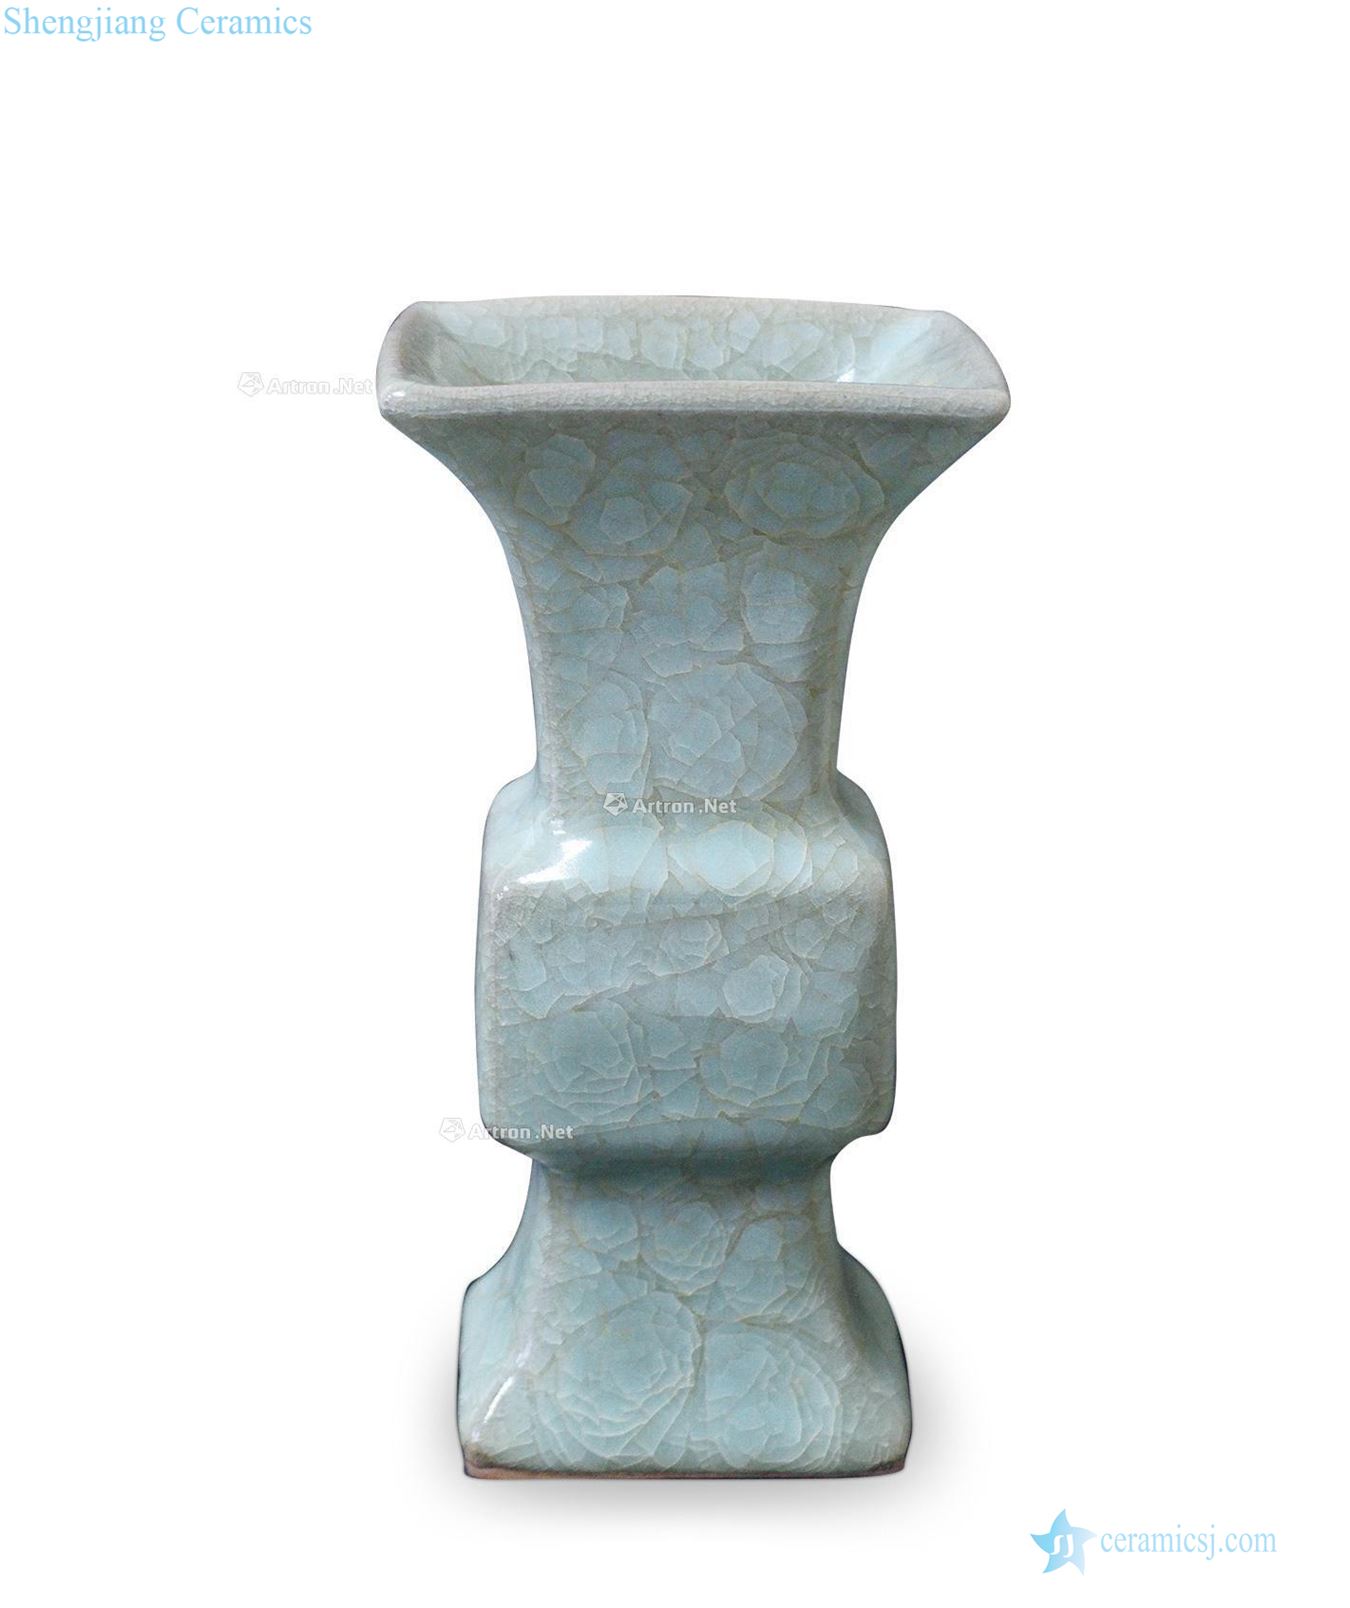 The song kiln flower vase with